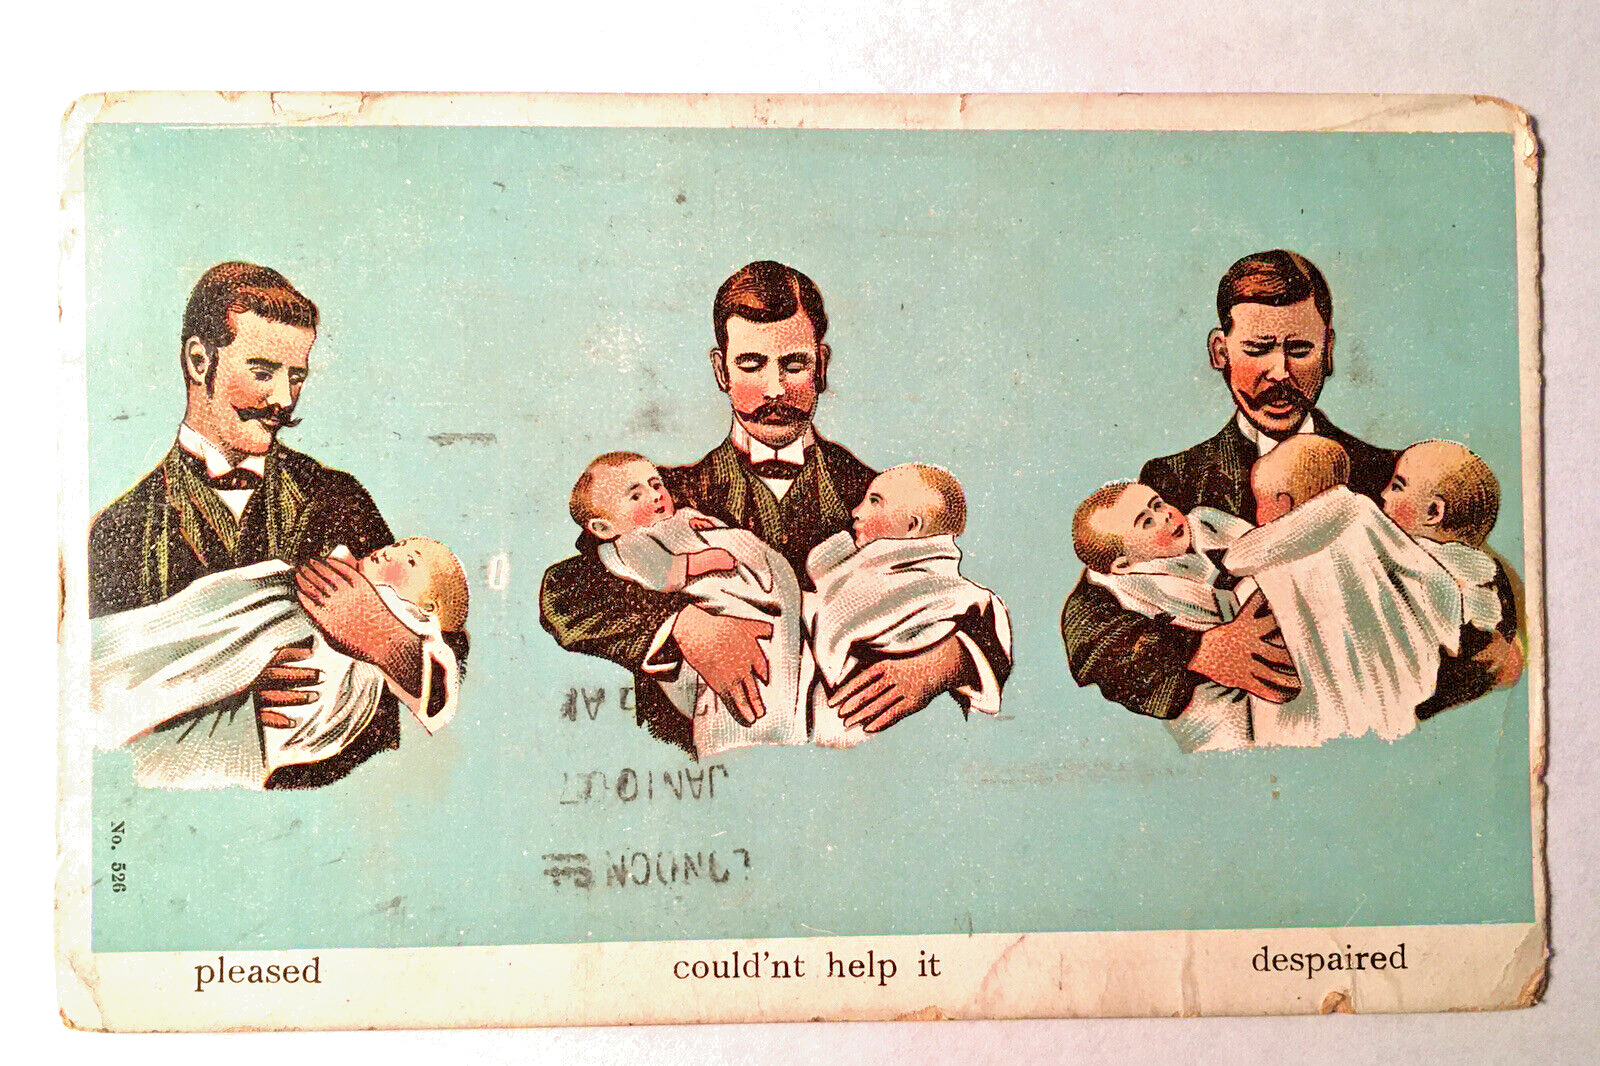 Man Holding Baby Crying Despaired Antique 1907 Comic Postcard Humor Fun